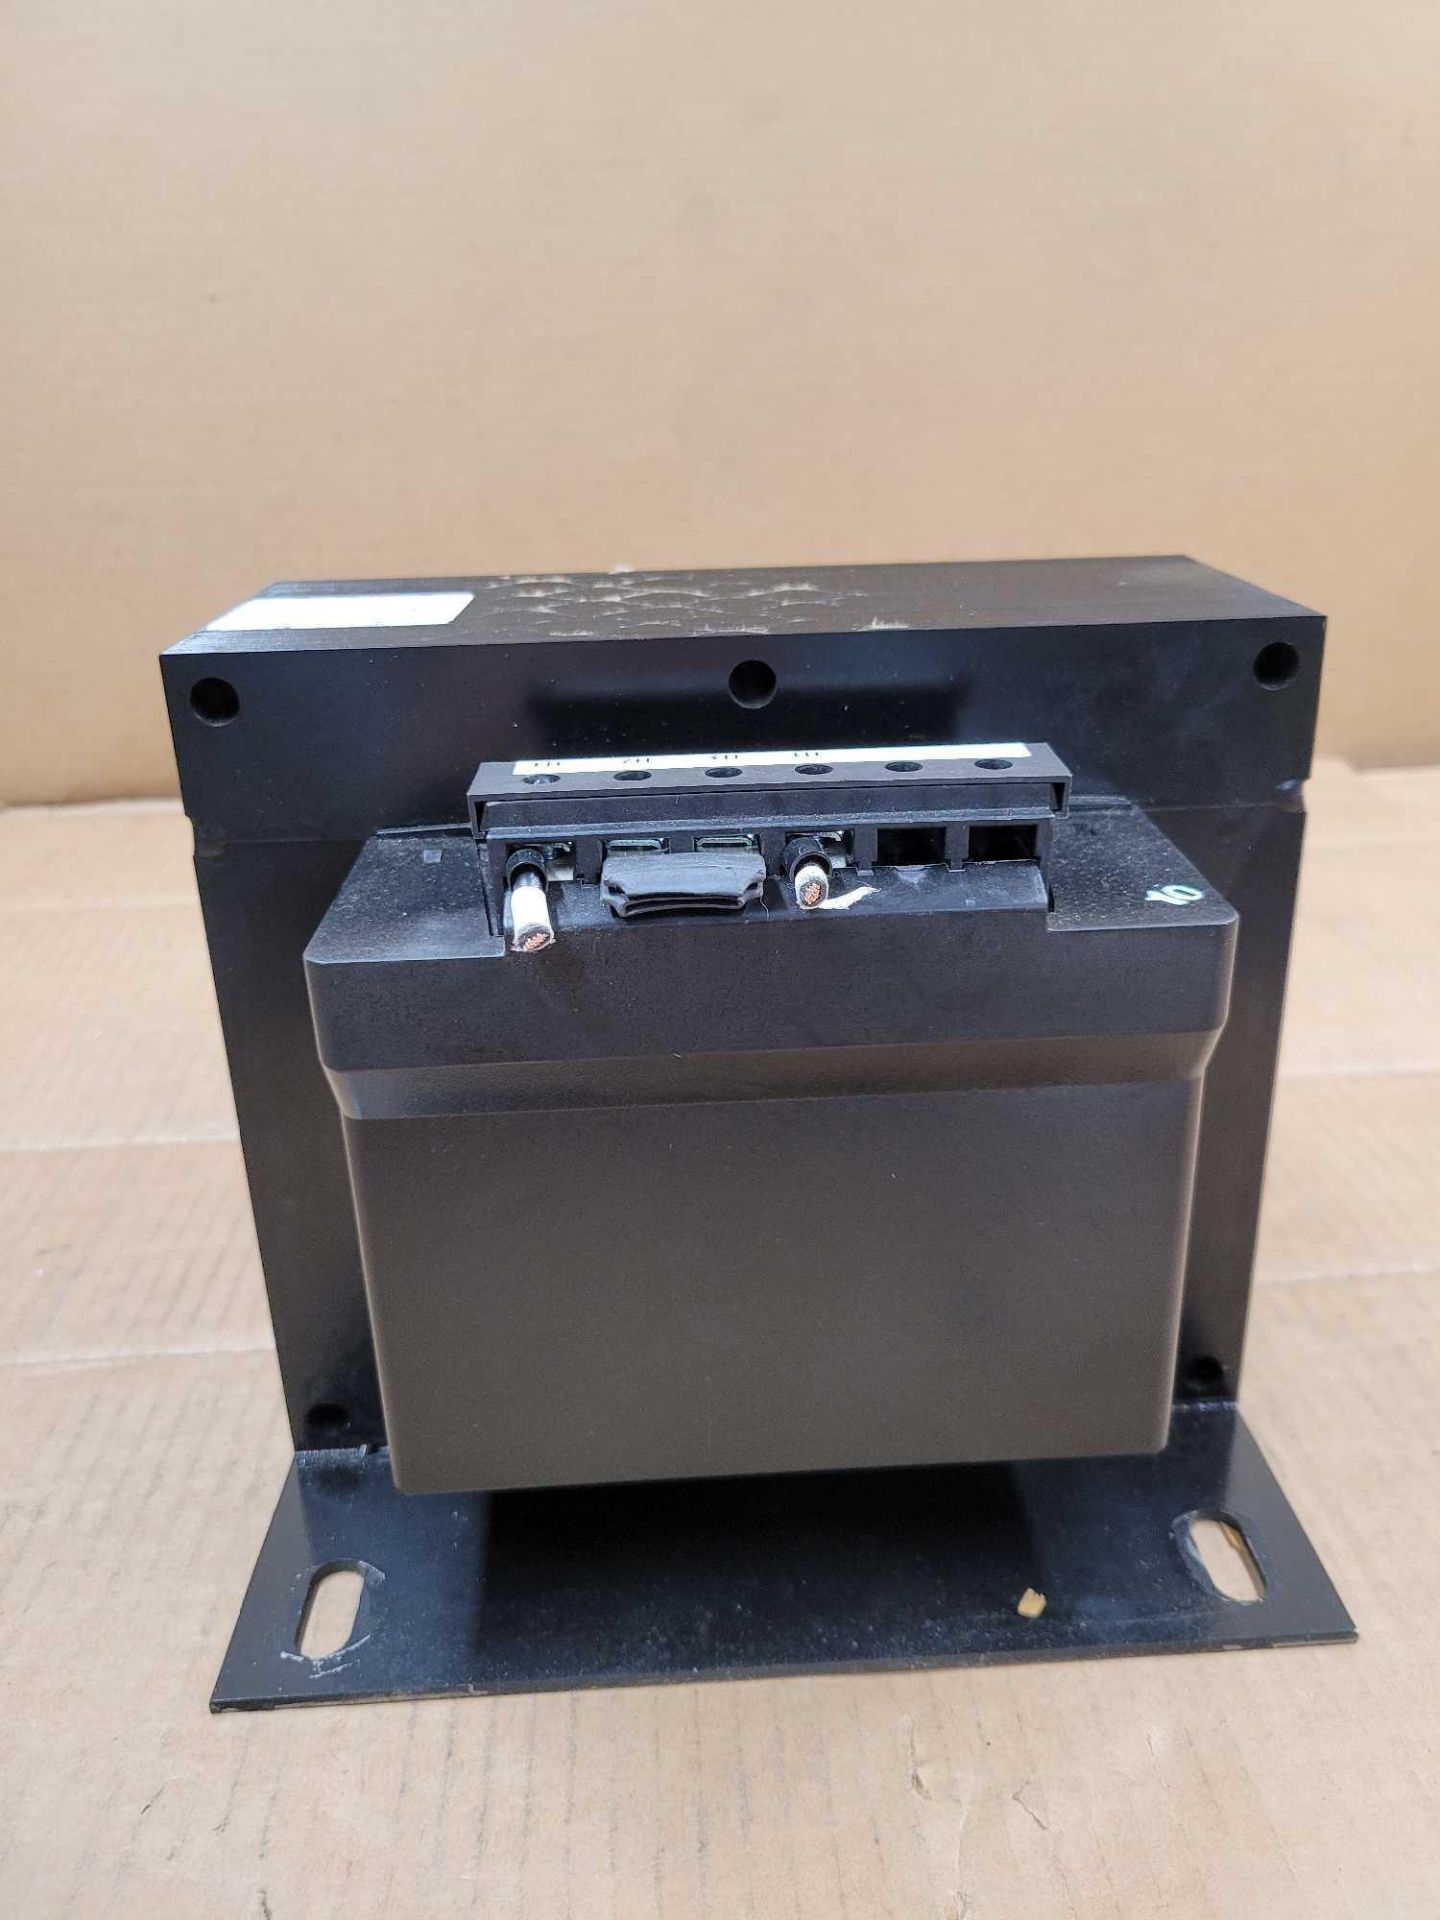 SIEMENS MTG5000A / Series B Industrial Control Transformer  /  Lot Weight: 73.6 lbs - Image 4 of 7